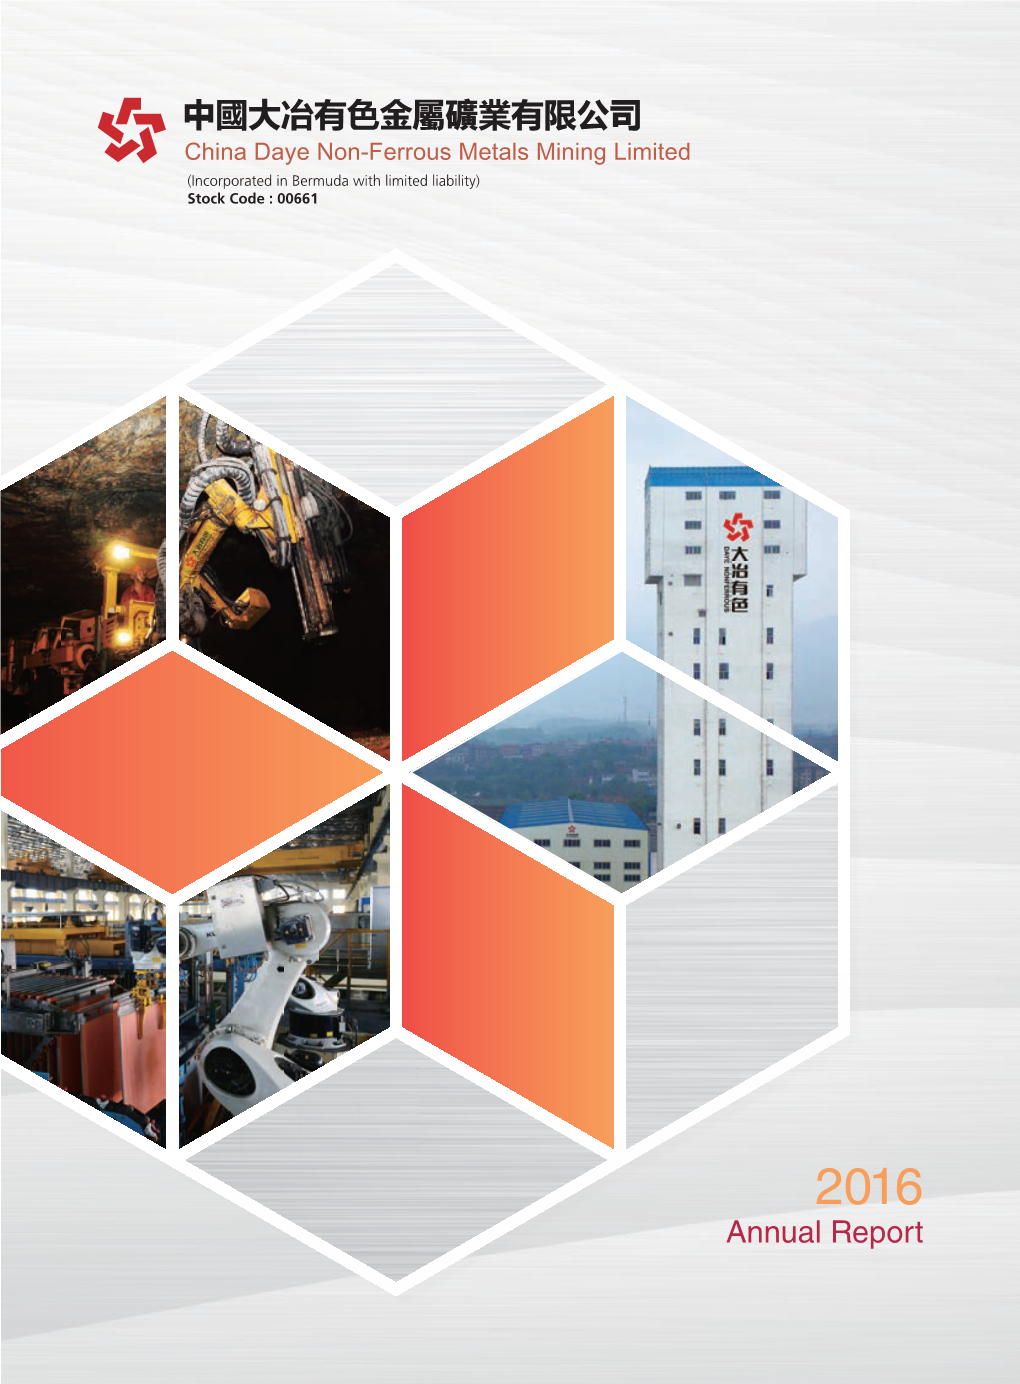 2016 Annual Report China Daye Non-Ferrous Metals Mining Limited Mineral Resources